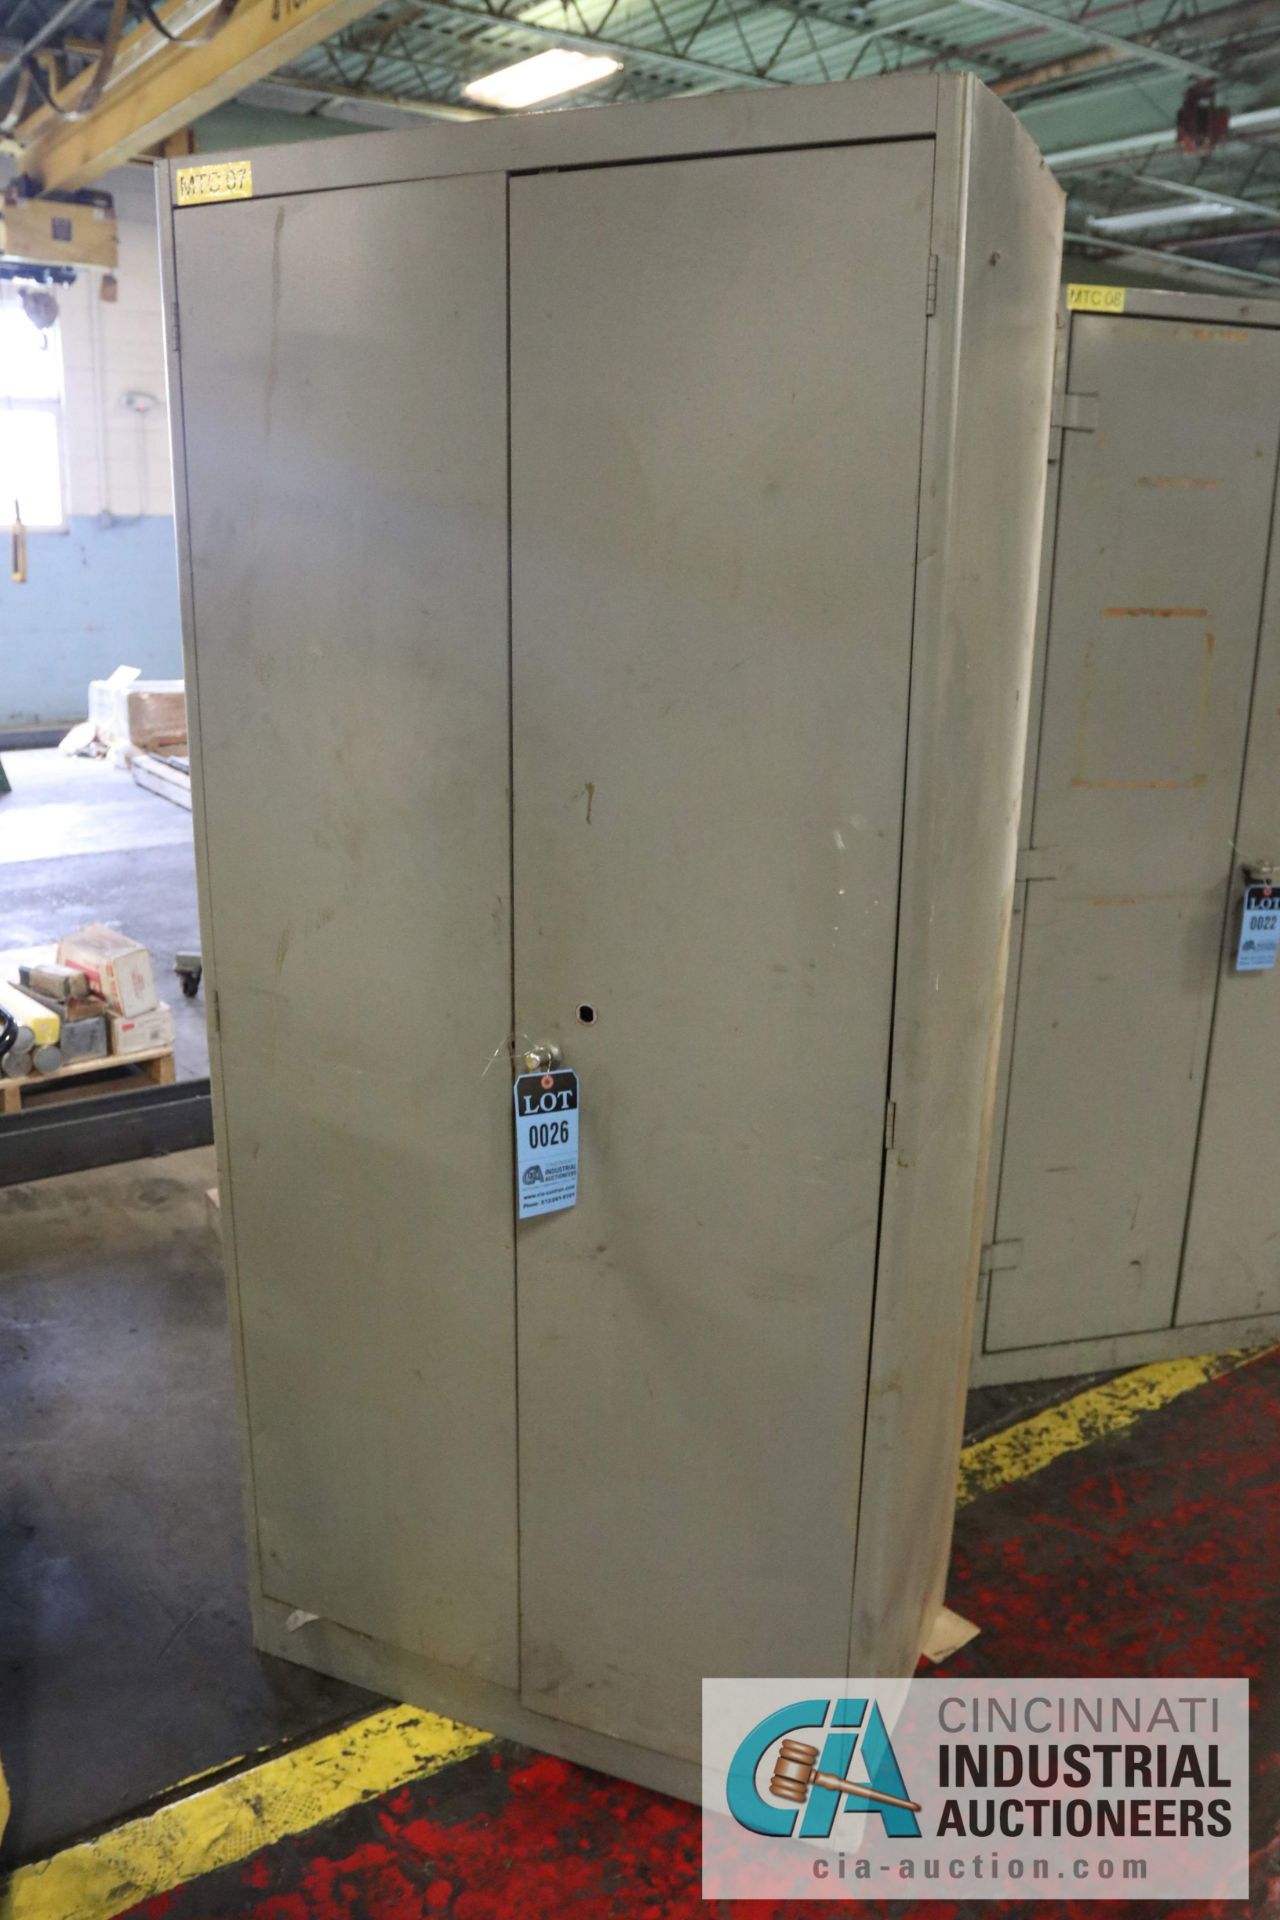 36" X 2" X 78" CABINET W/ SHELVES - $10.00 Rigging Fee Due to Onsite Rigger - Located in Bryan,